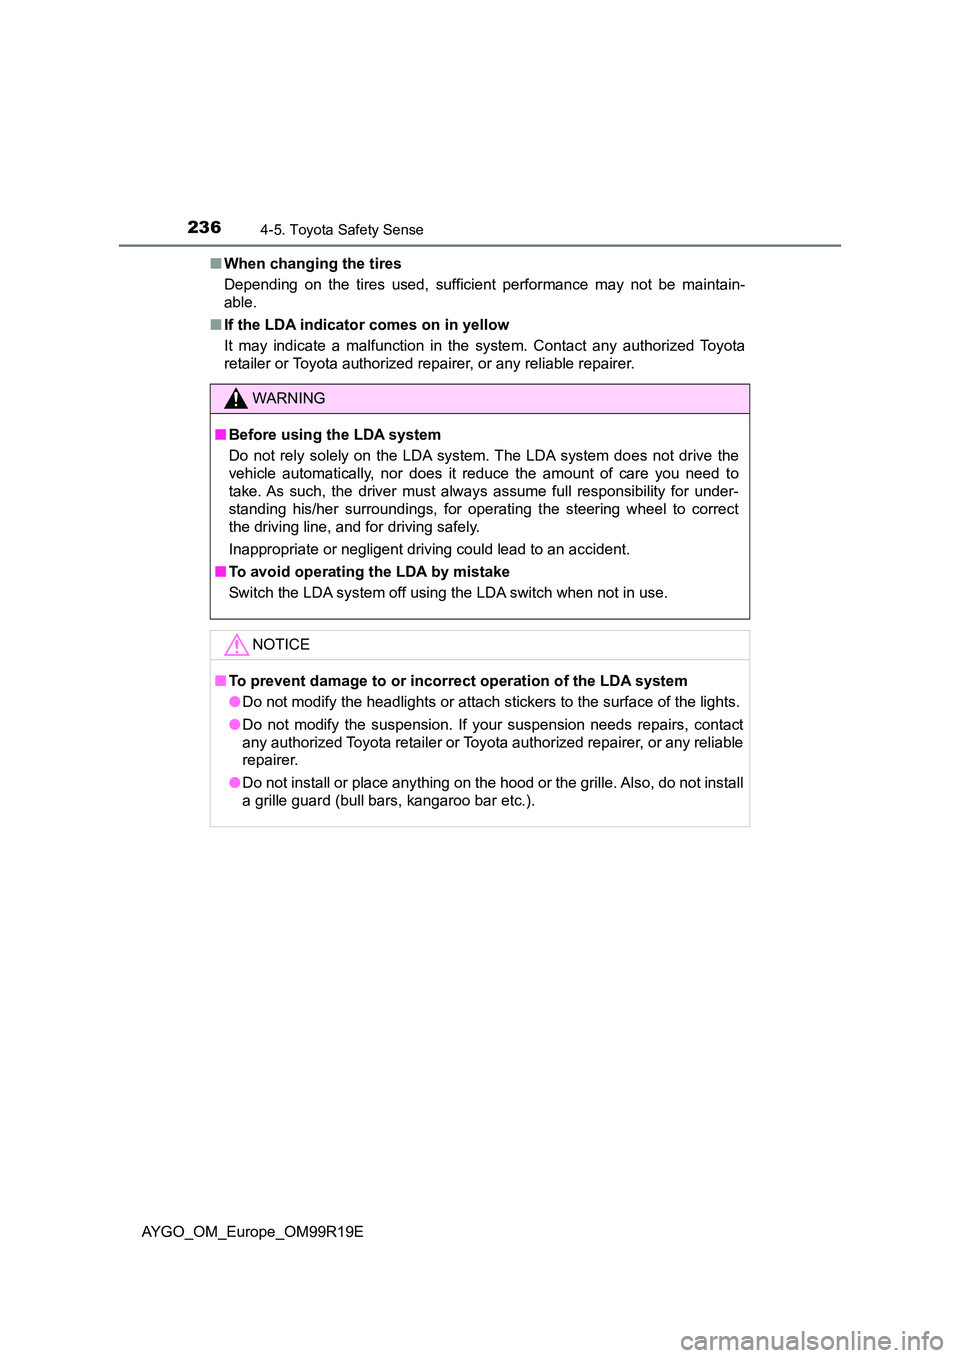 TOYOTA AYGO 2019  Owners Manual (in English) 2364-5. Toyota Safety Sense
AYGO_OM_Europe_OM99R19E 
■ When changing the tires 
Depending on the tires used, sufficient performance may not be maintain- 
able. 
■ If the LDA indicator comes on in 